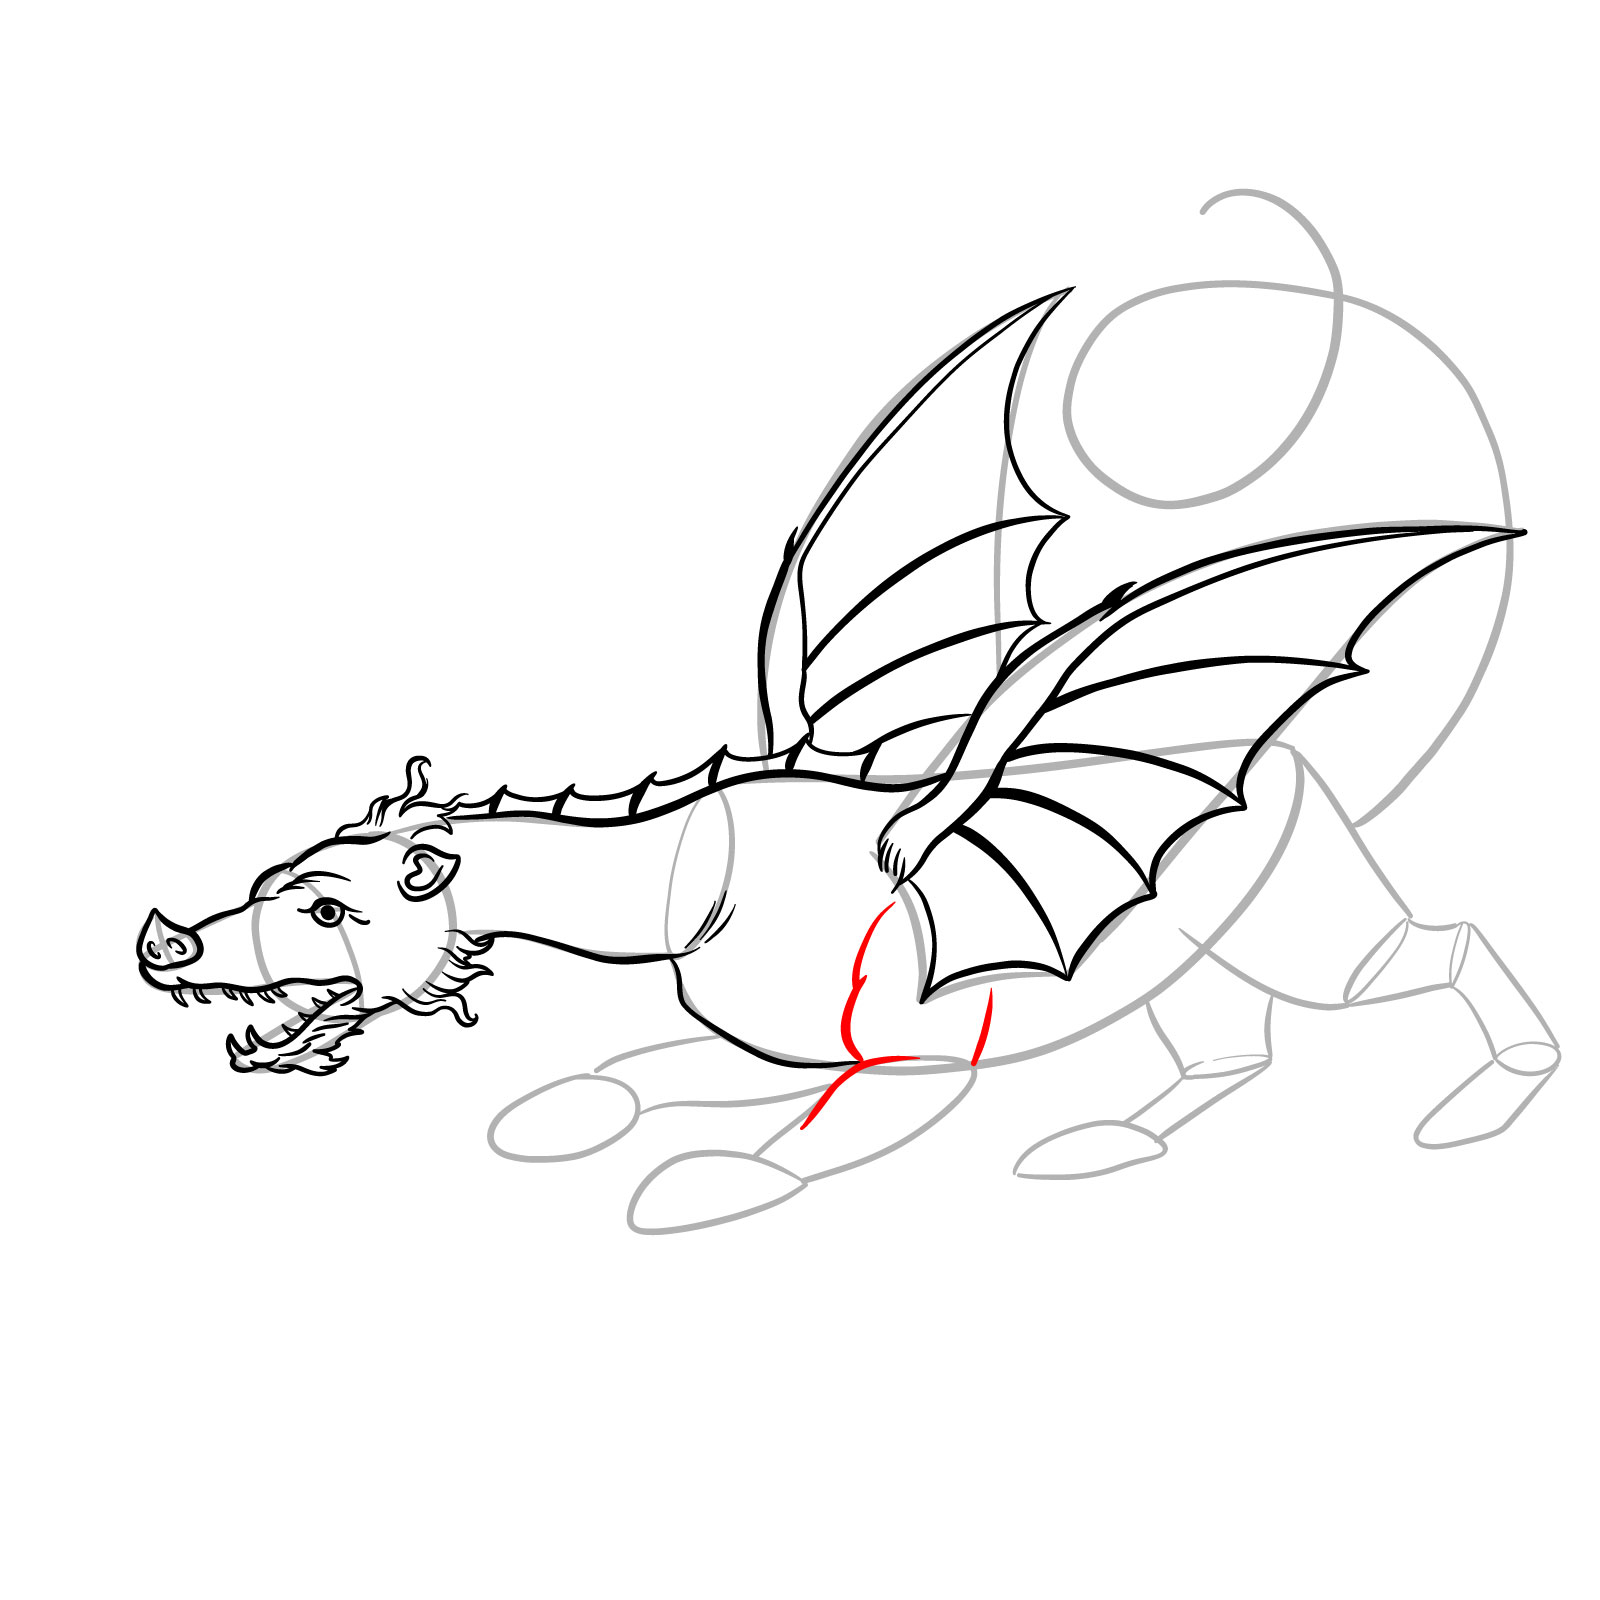 How to draw a classic European dragon - step 25